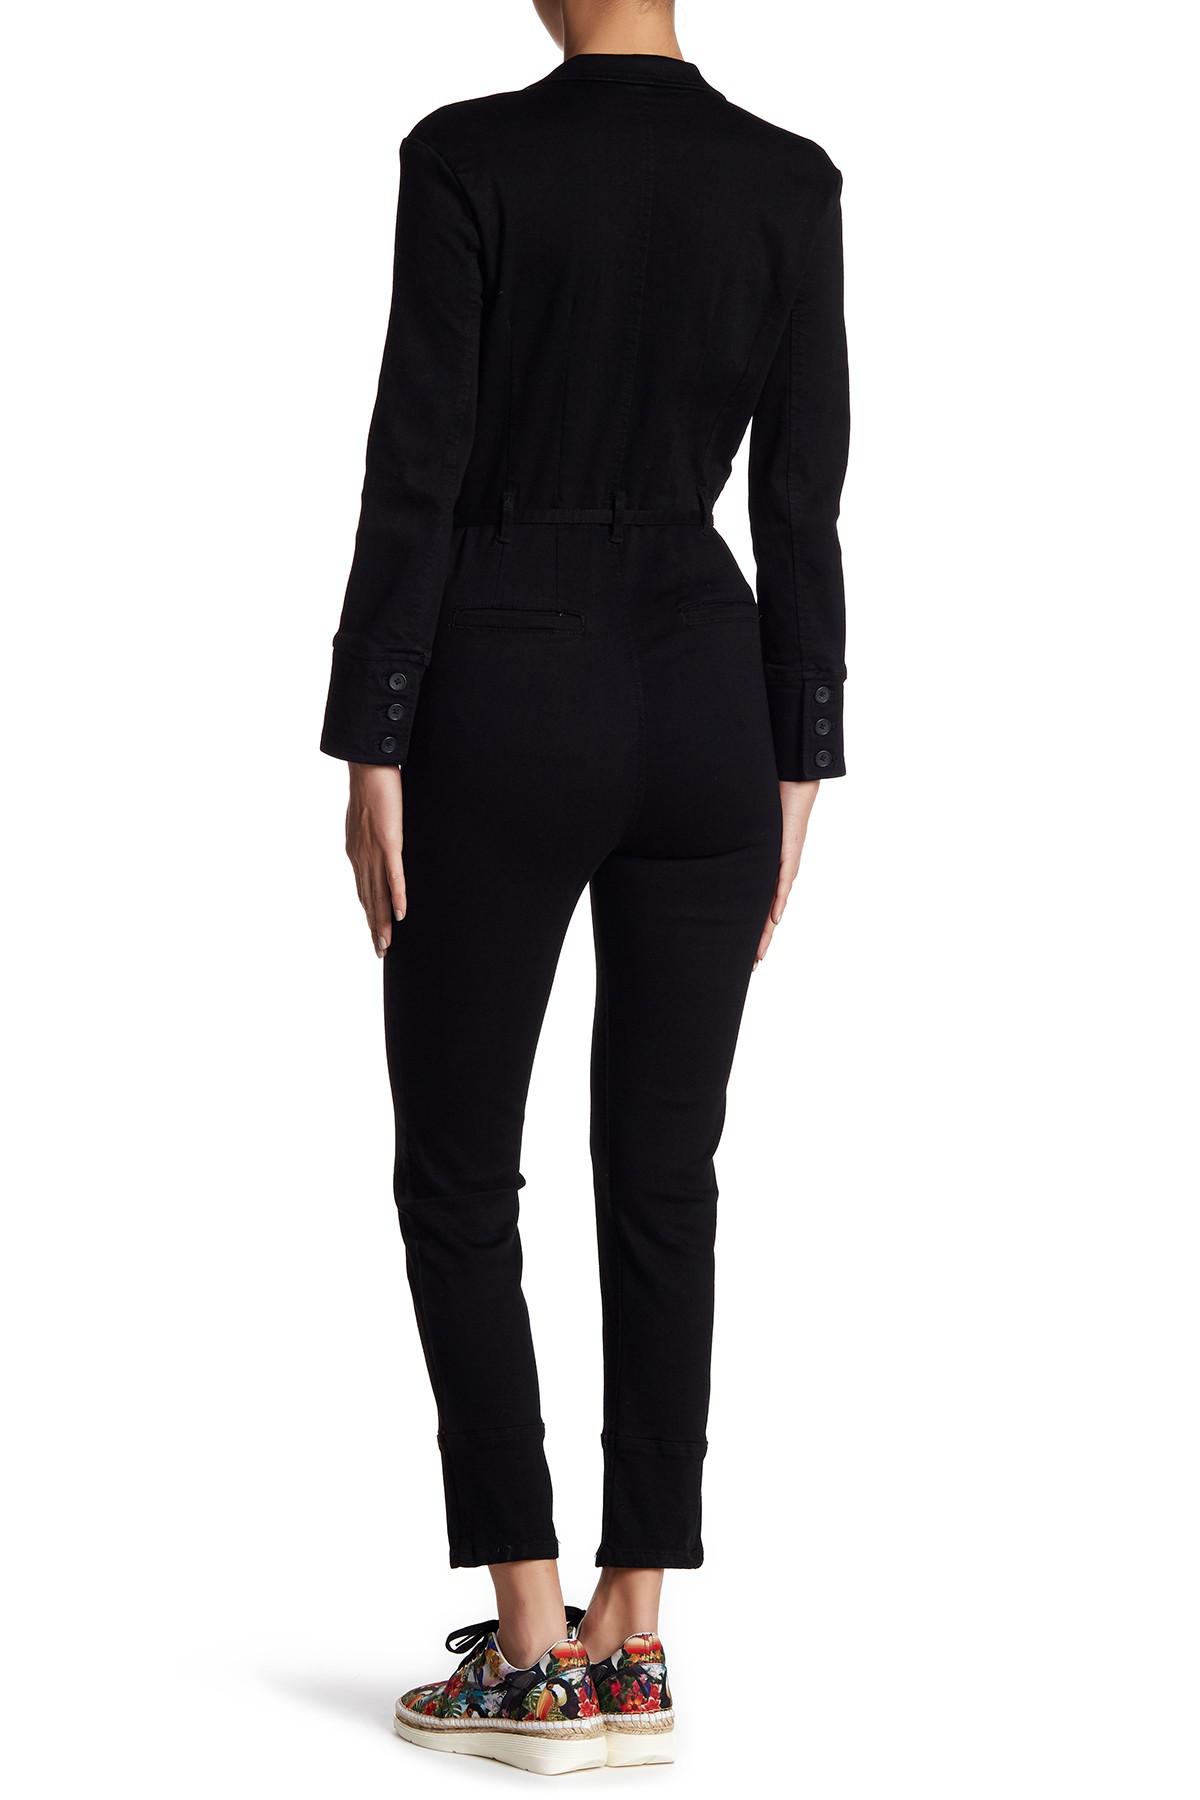 Lyst - Free People Take Me Out Long Sleeve Jumpsuit in Black